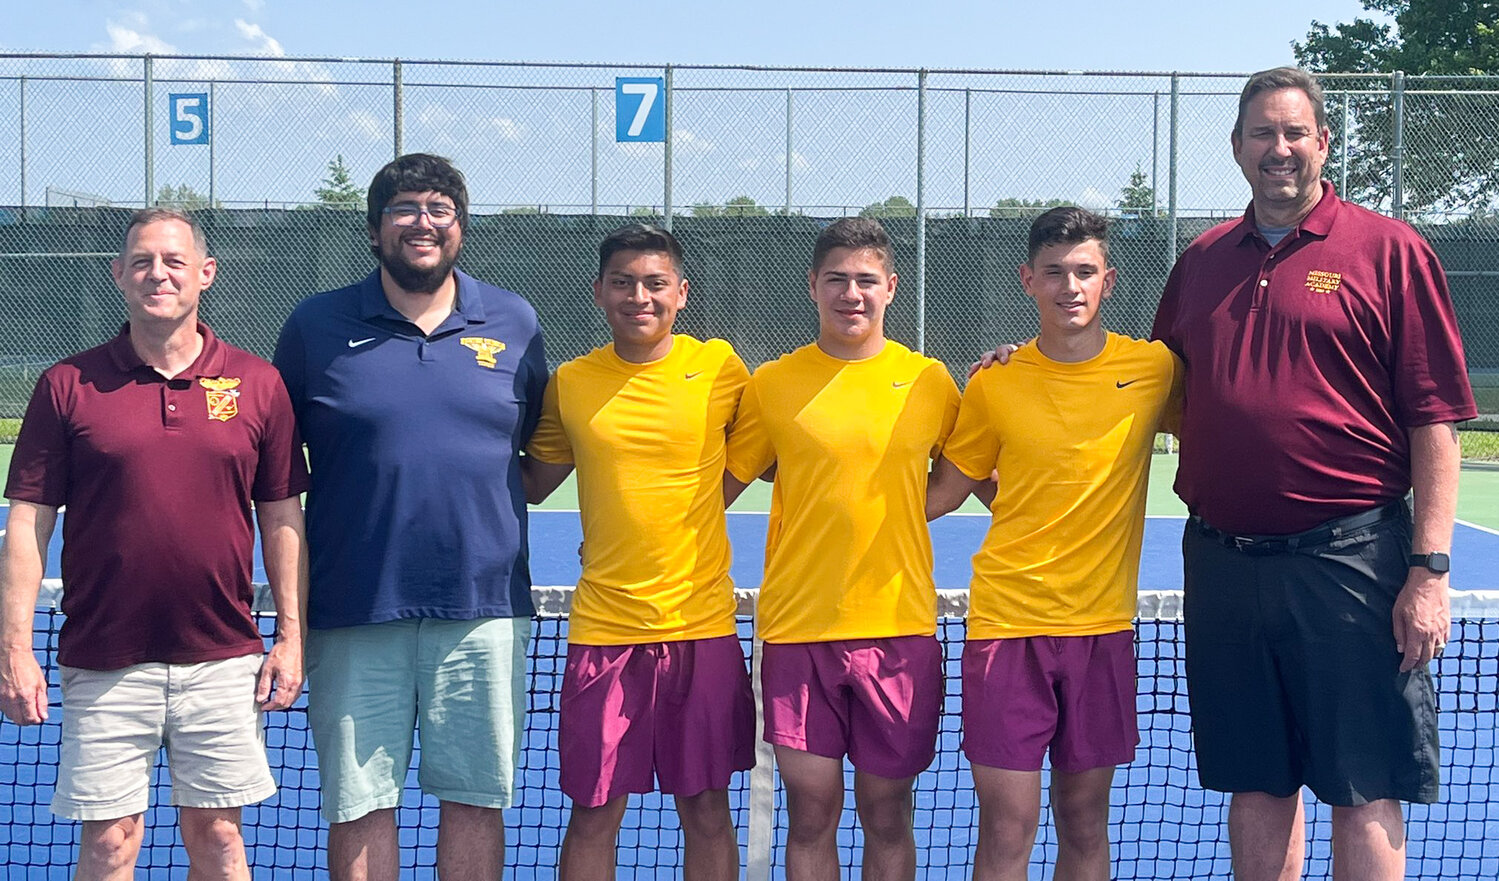 Missouri Military Academy cadets competed Thursday, May 18 in the Class 2 individual state tournament at Cooper Tennis Complex in Springfield. At the tournament, from left, were coach Tom Allen, head coach Brad Smith, qualifiers Samuel Way, Patricio Bravo Knobloch and Gorka Yarte, and athletic director Brian Meny.